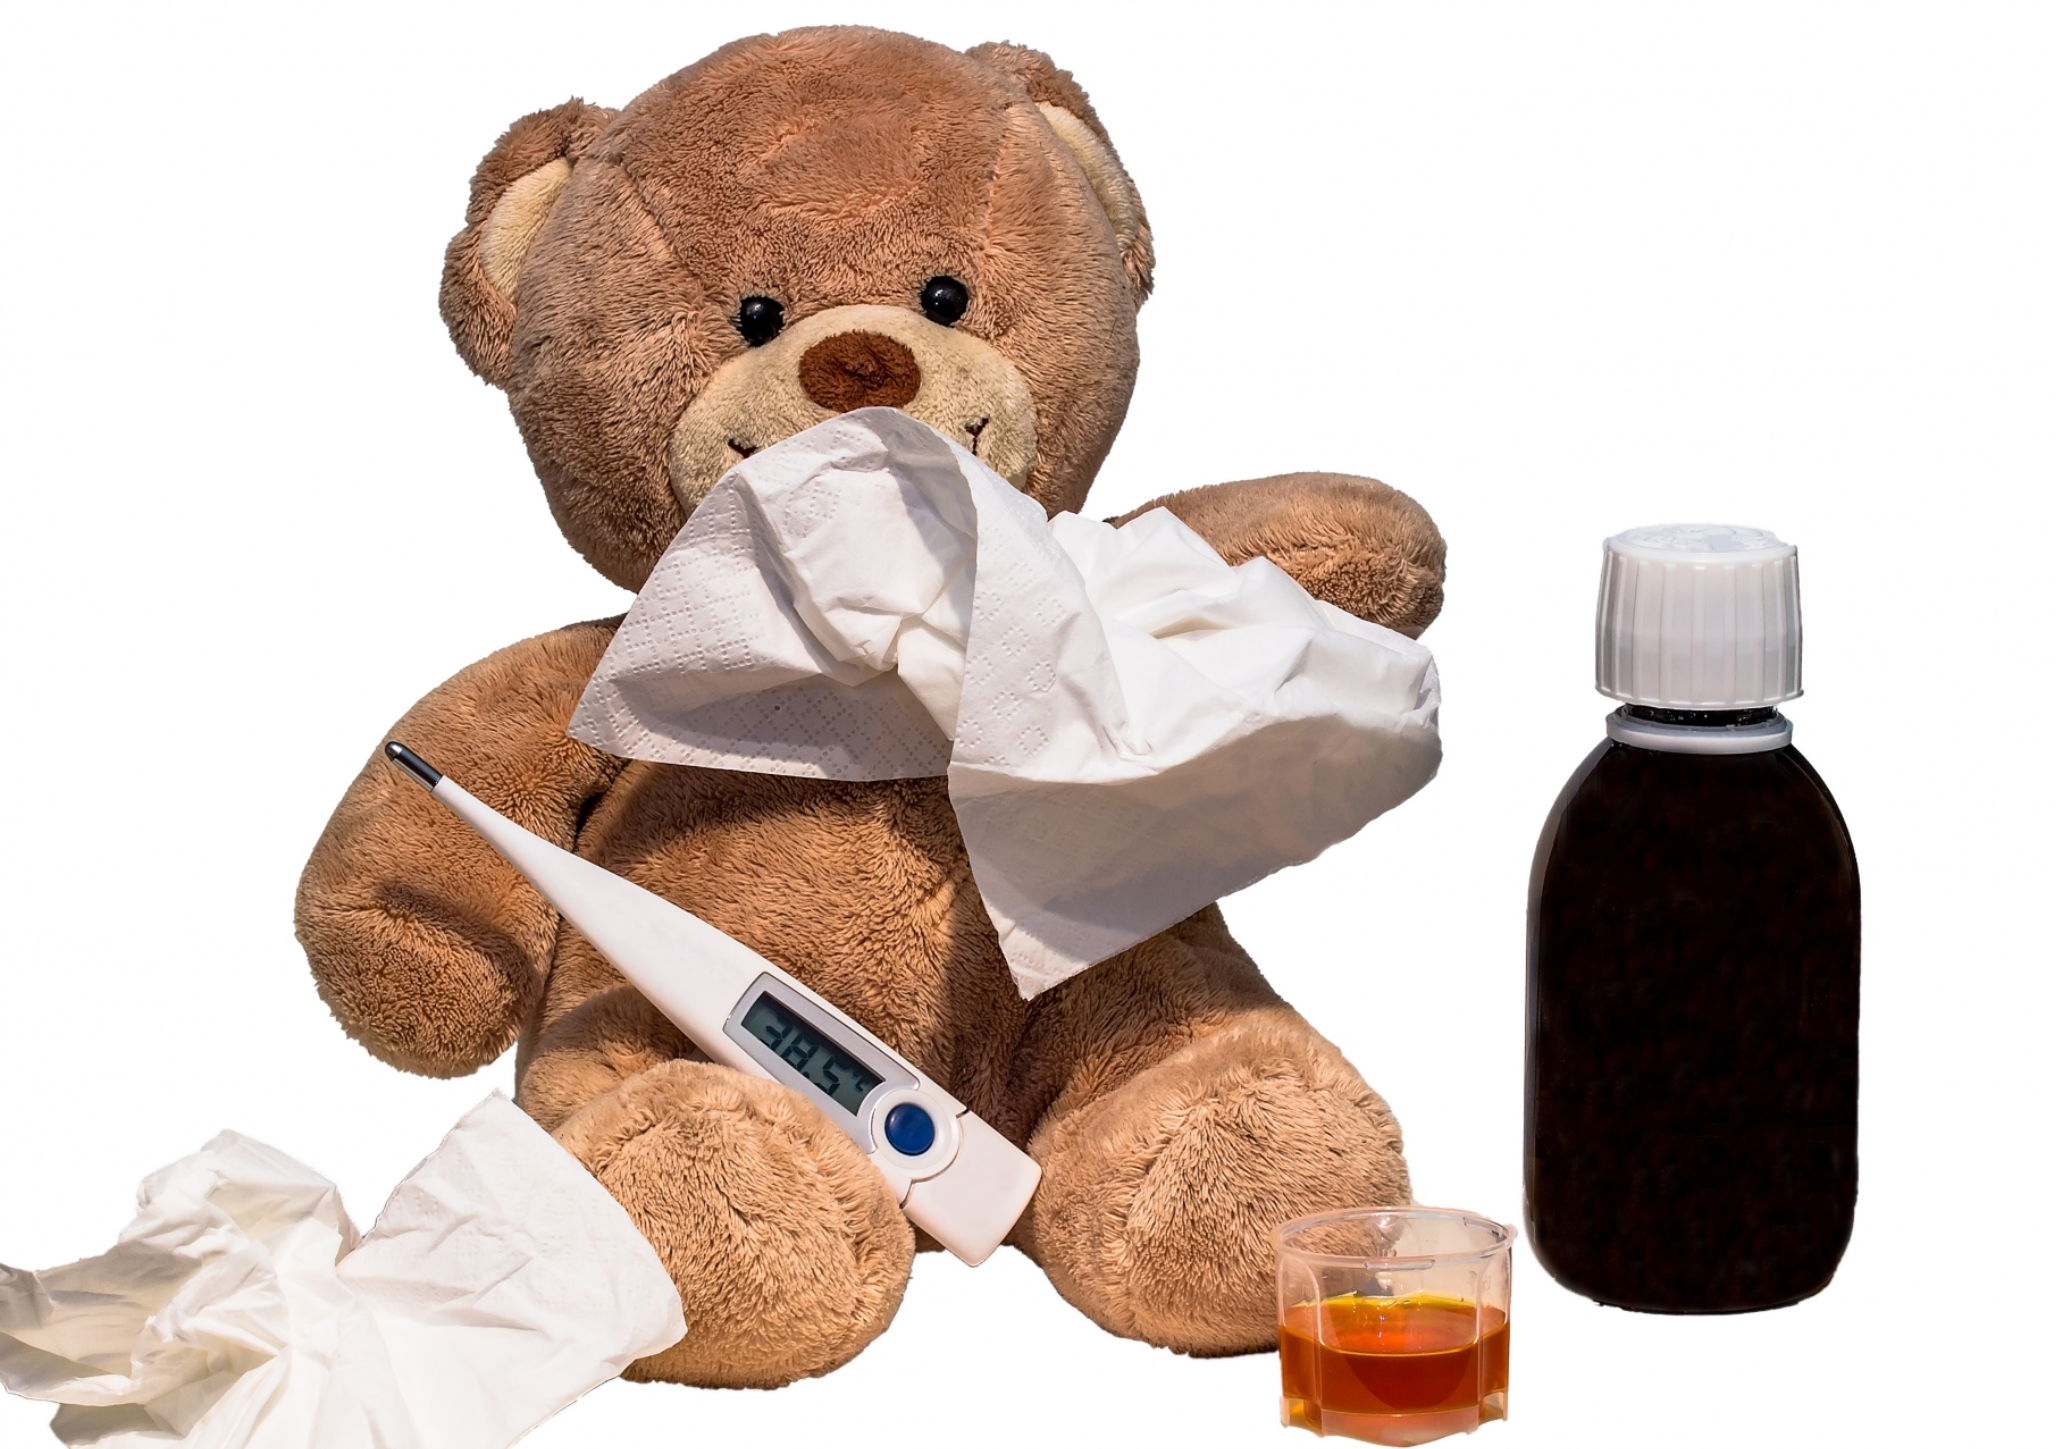 Teddy bear with a tissue on his nose surrounded by medication